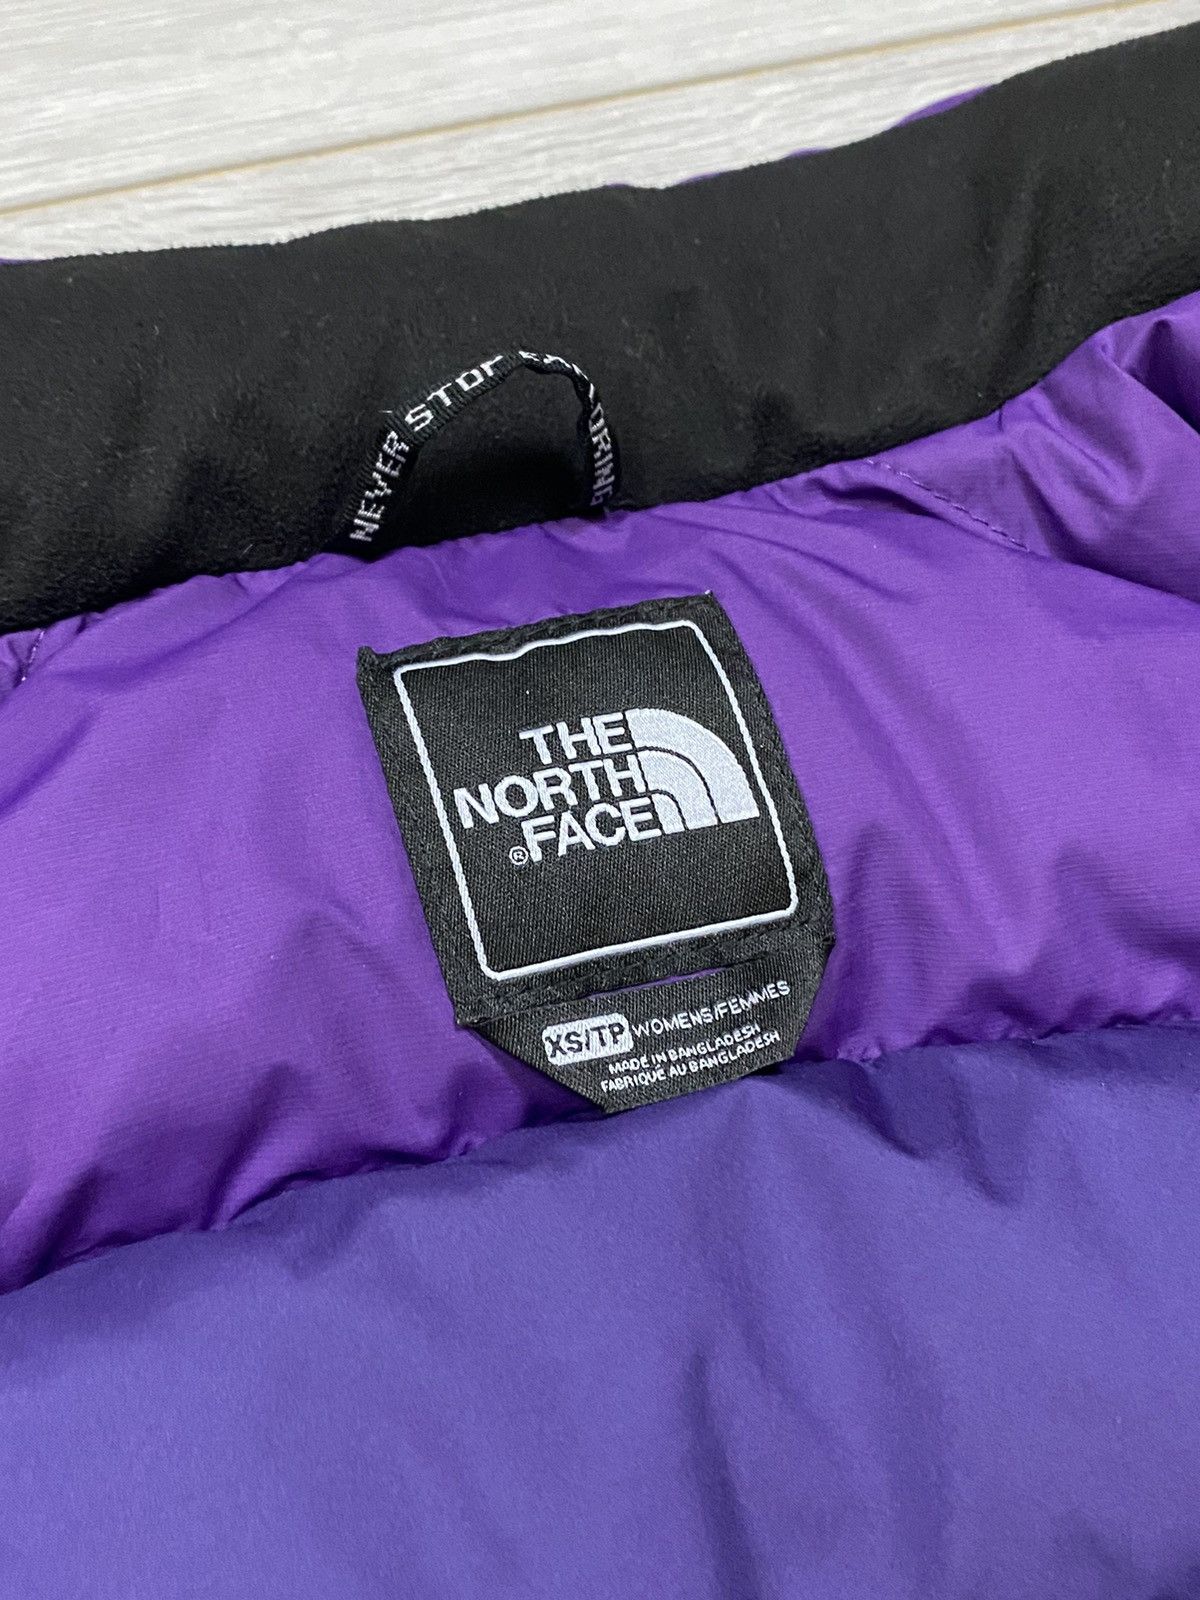 The North Face The North Face 700 purple women down vest Size XS / US 0-2 / IT 36-38 - 9 Thumbnail